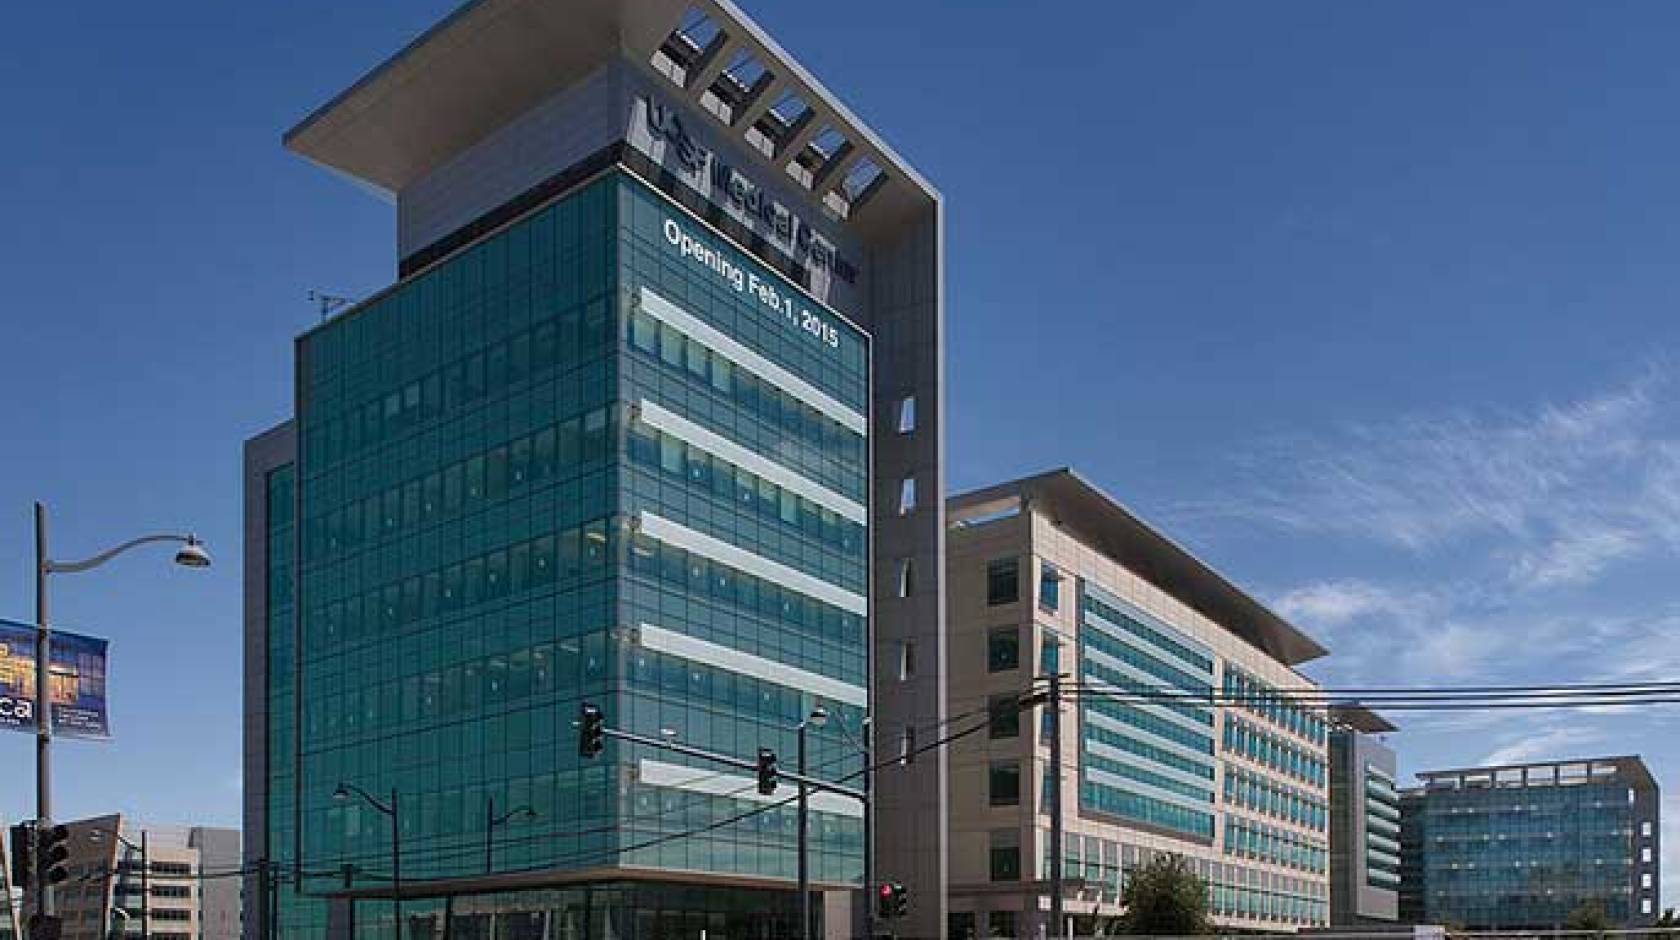 UCSF Mission Bay hospital complex